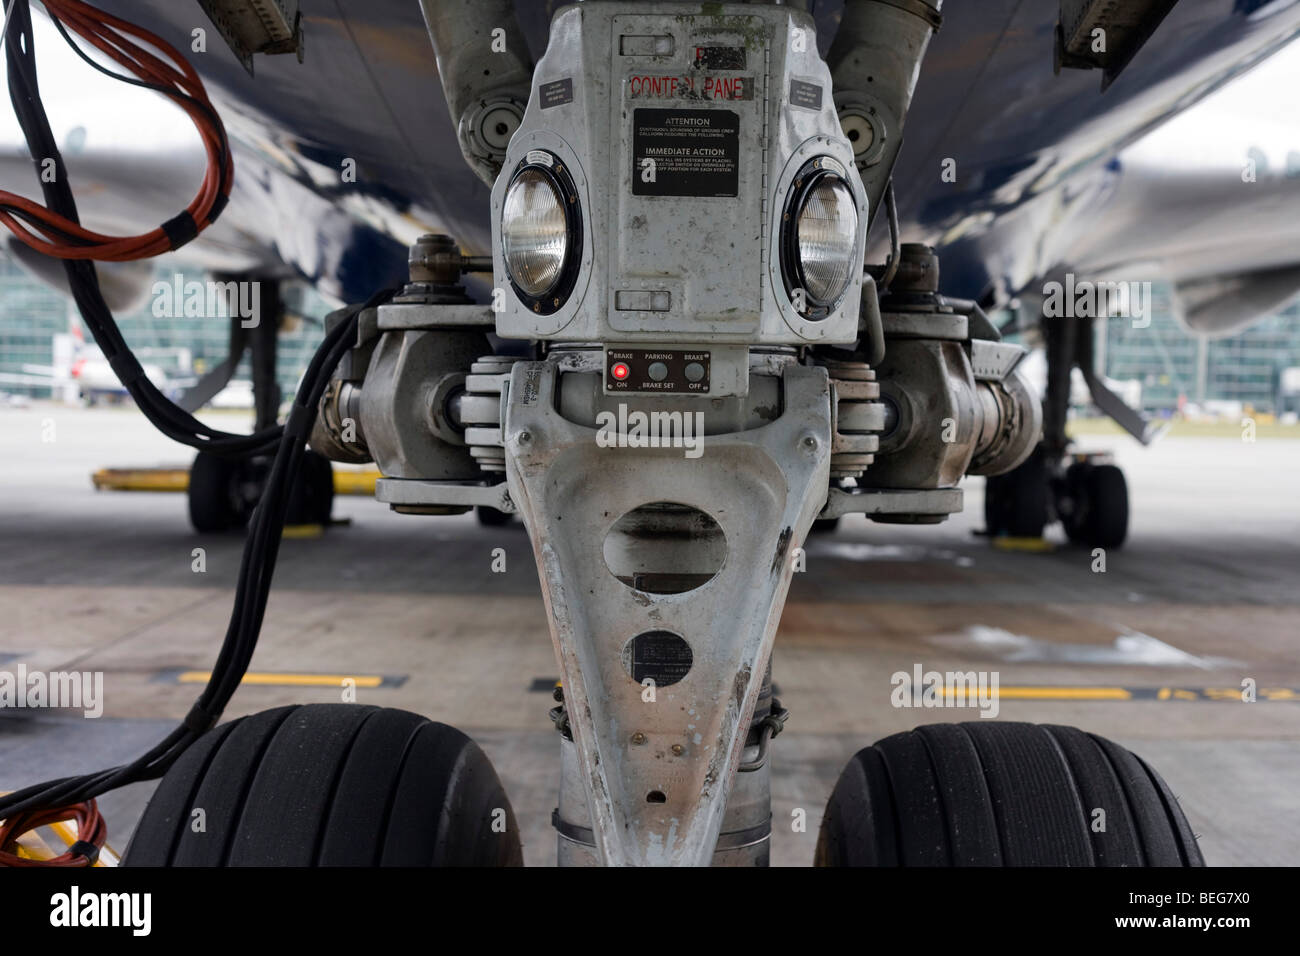 A close-up detail of a Boeing 747 main nosewheel and landing lights during the aircraft's turnaround at Heathrow Airport. Stock Photo